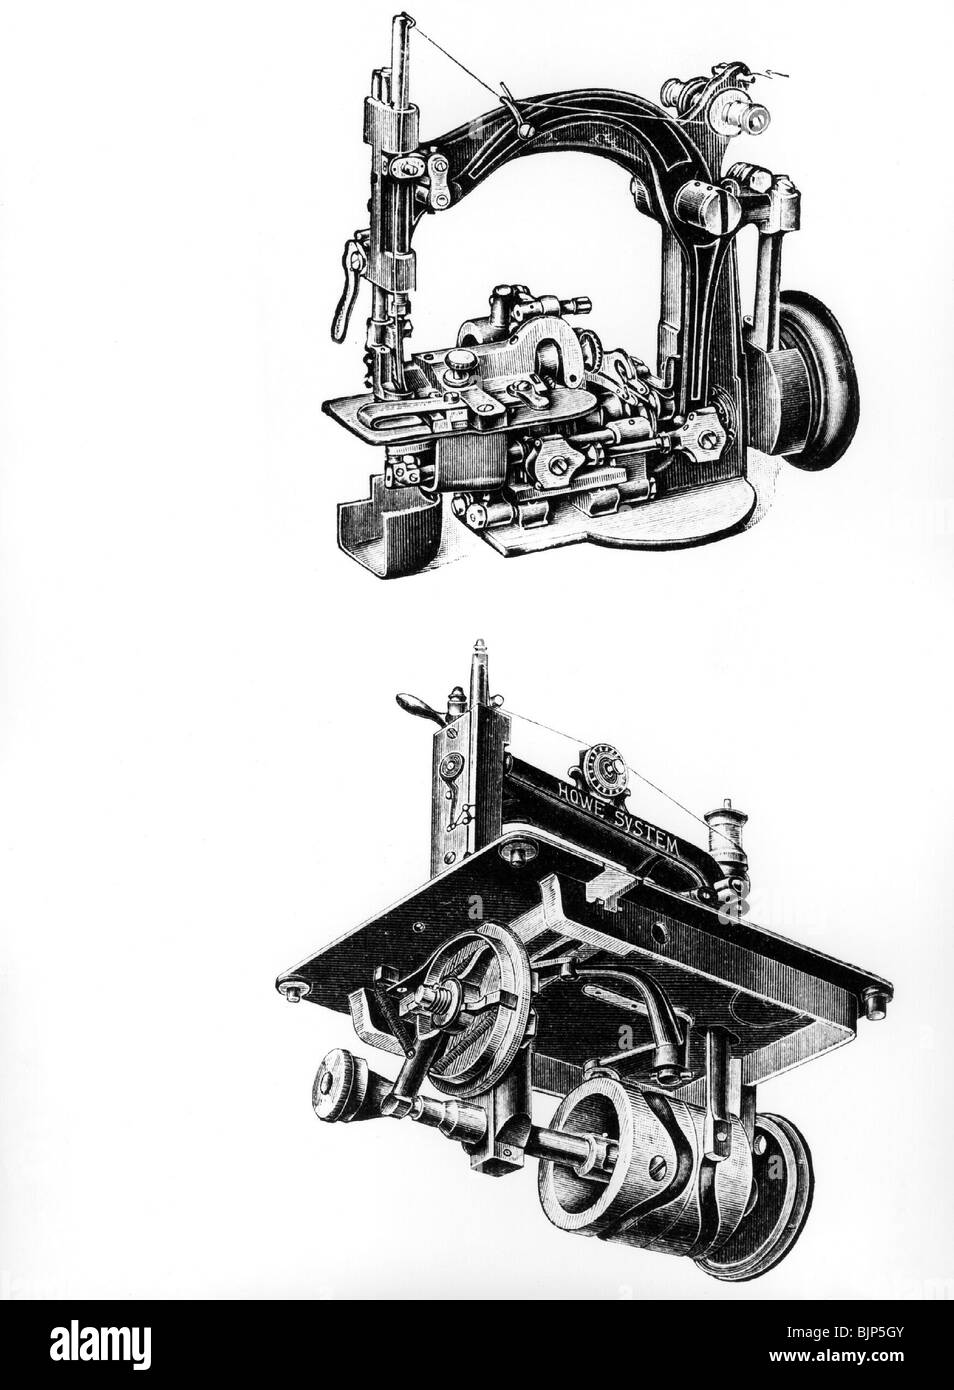 household, sewing, sewing machines by E. Böttcher, embroidery stitch machine by E. Boettcher and sewing machine by Howe, wood engraving, 19th century, historic, historical, clipping, cut out, technics, technic, cut-out, cut-outs, Stock Photo